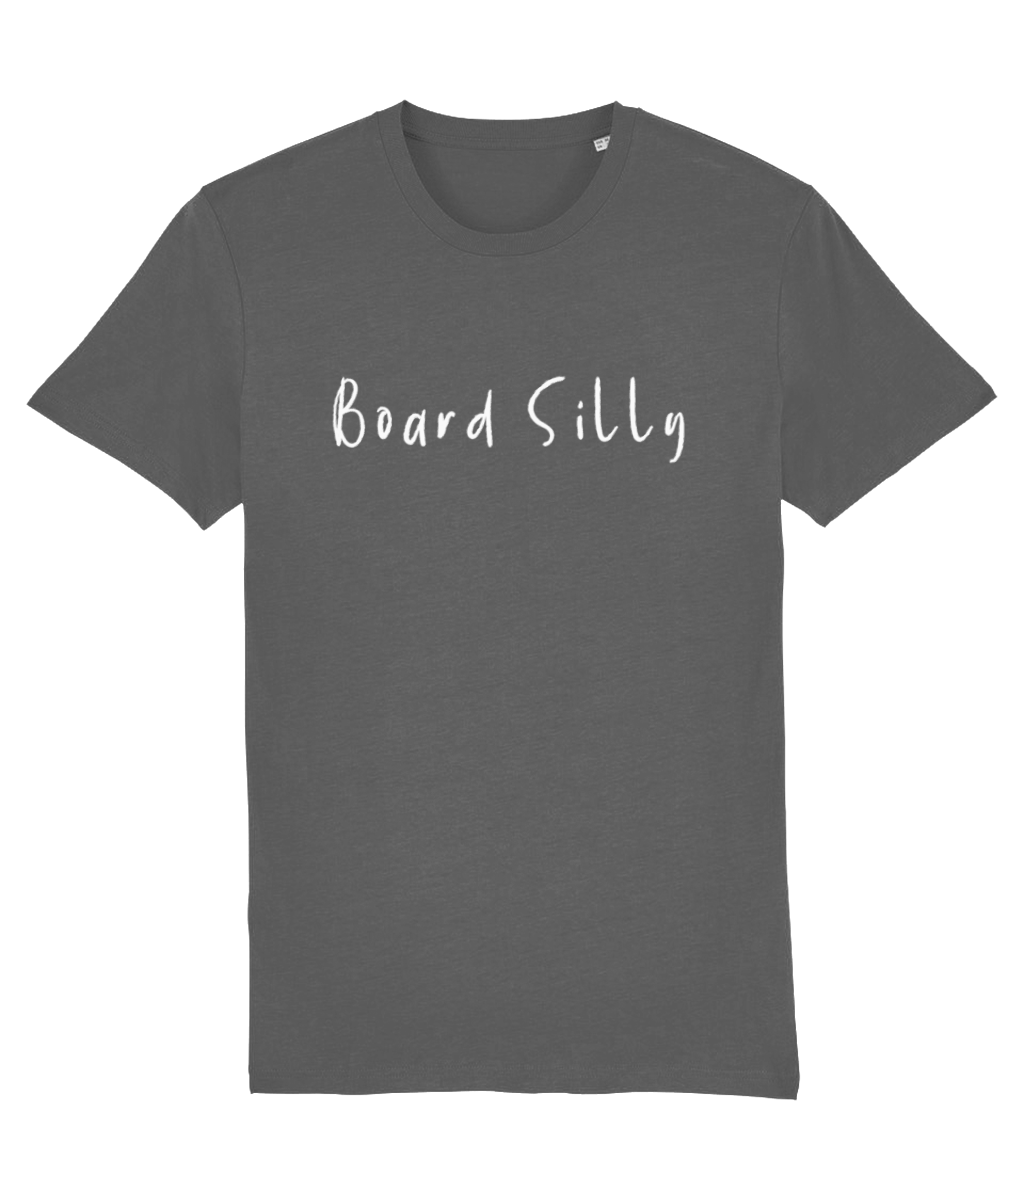 Board Silly Paddle board T shirt